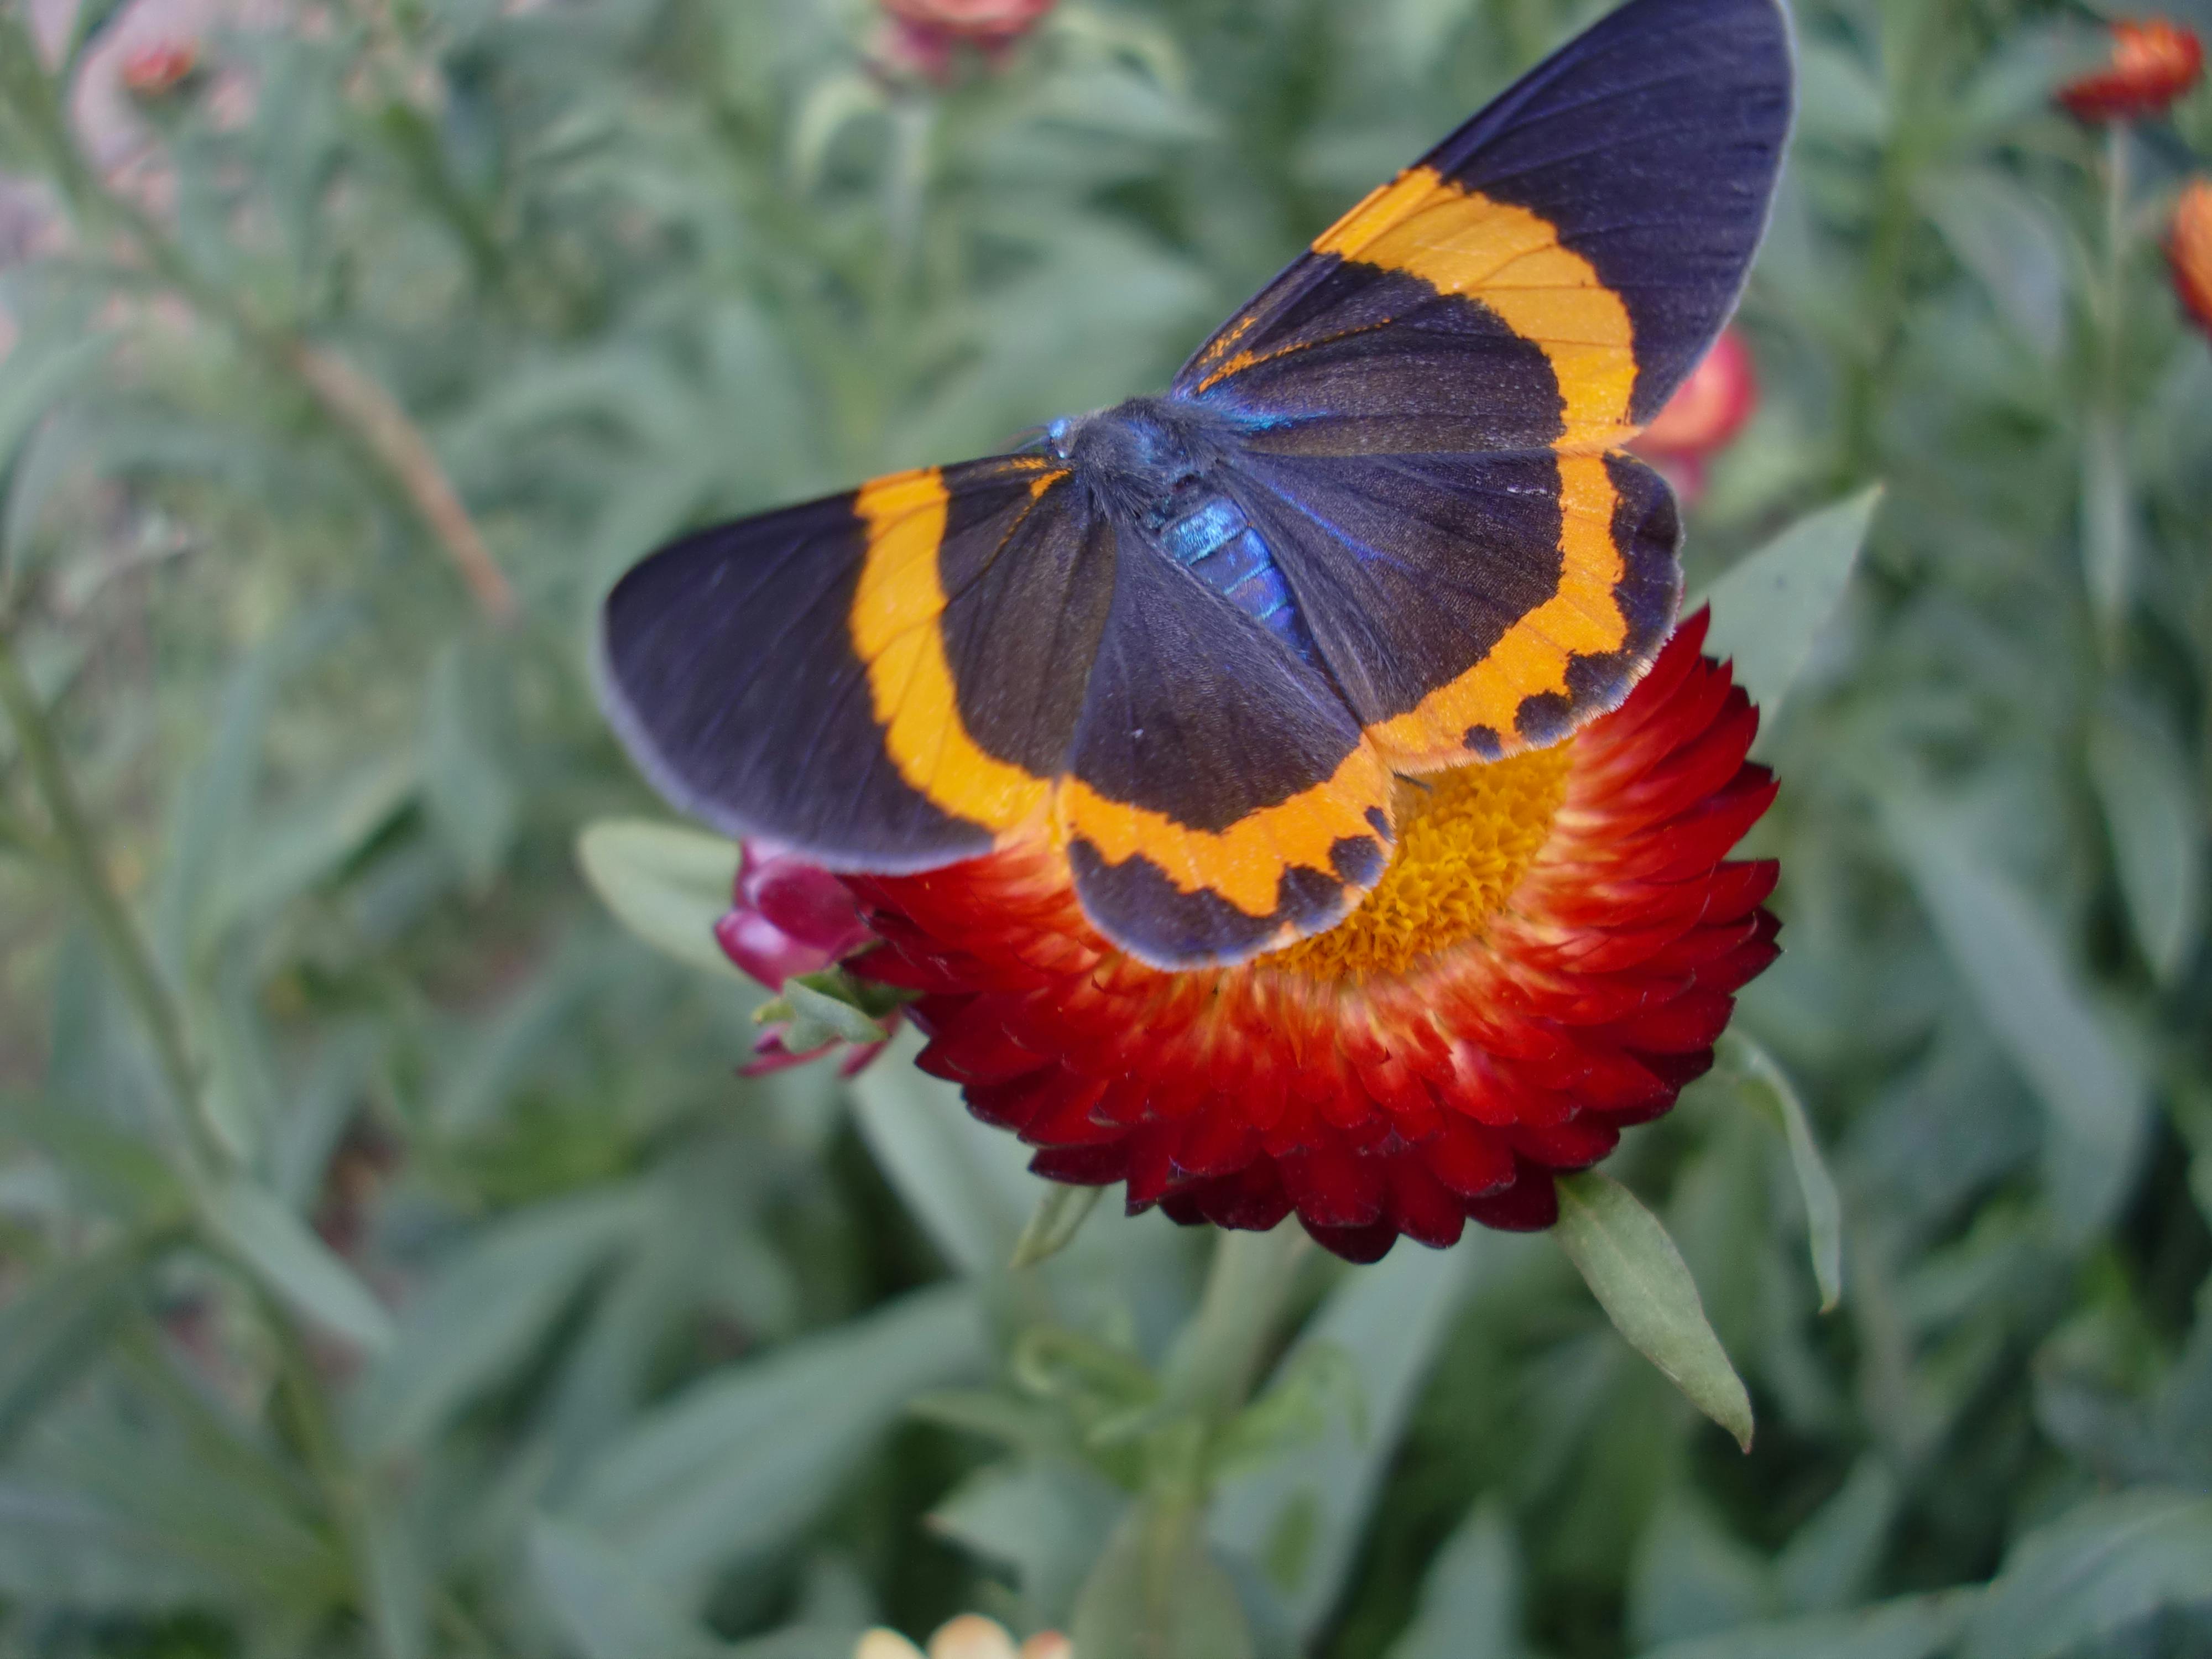 Free stock photo of #butterfly #blue #macro rare #red #flower #nature